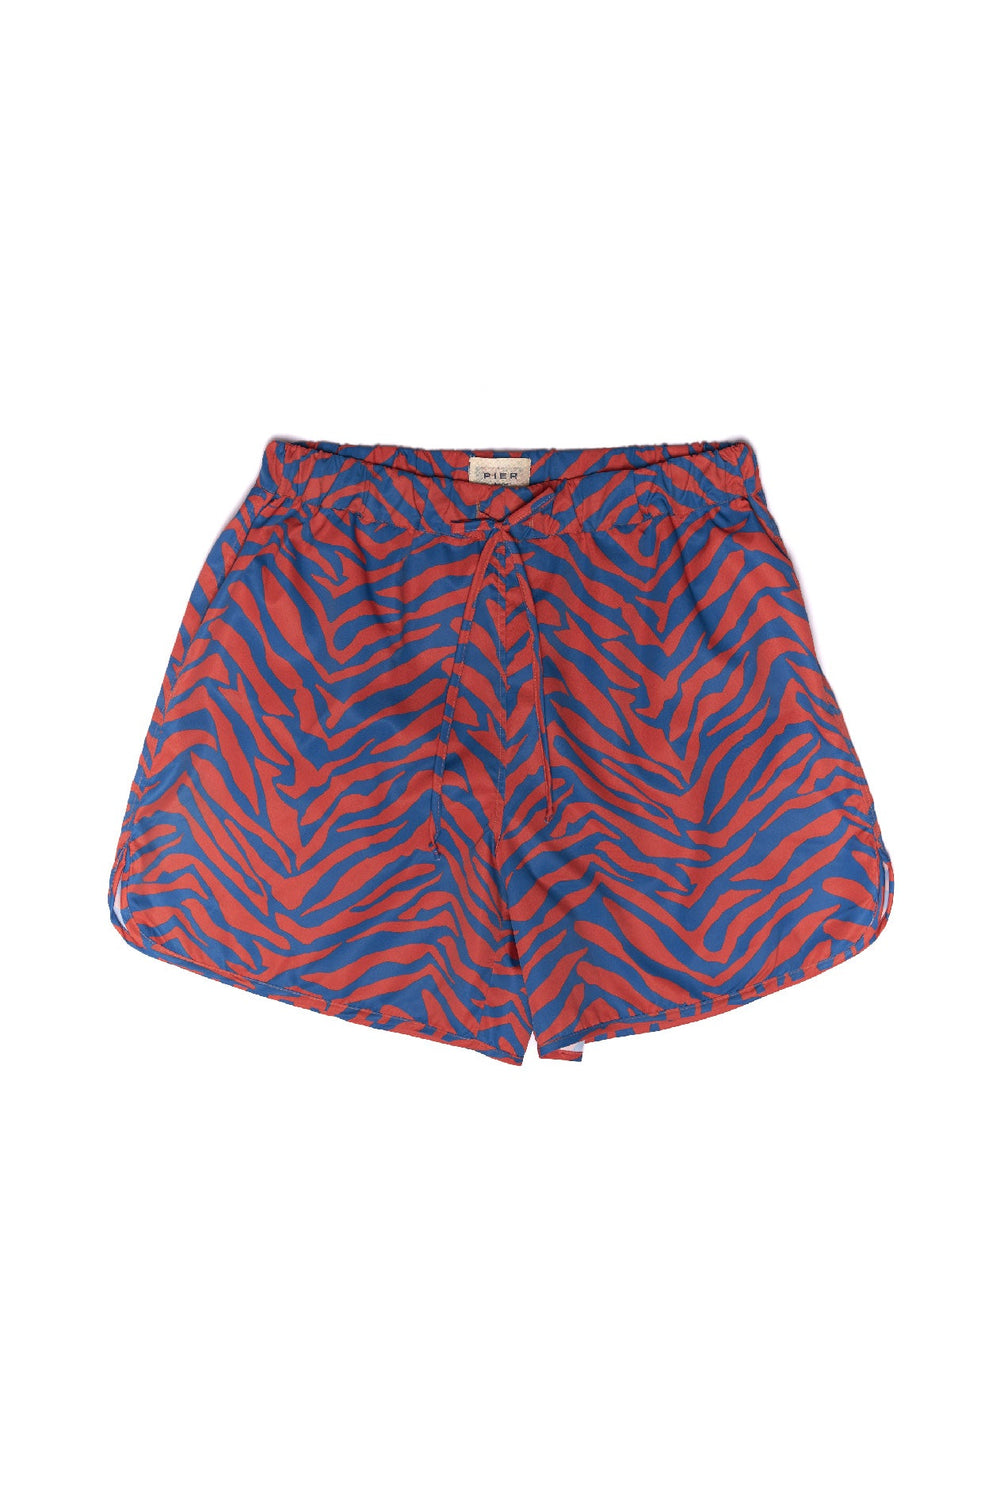 Red and blue zebra print shorts with elastic waistband